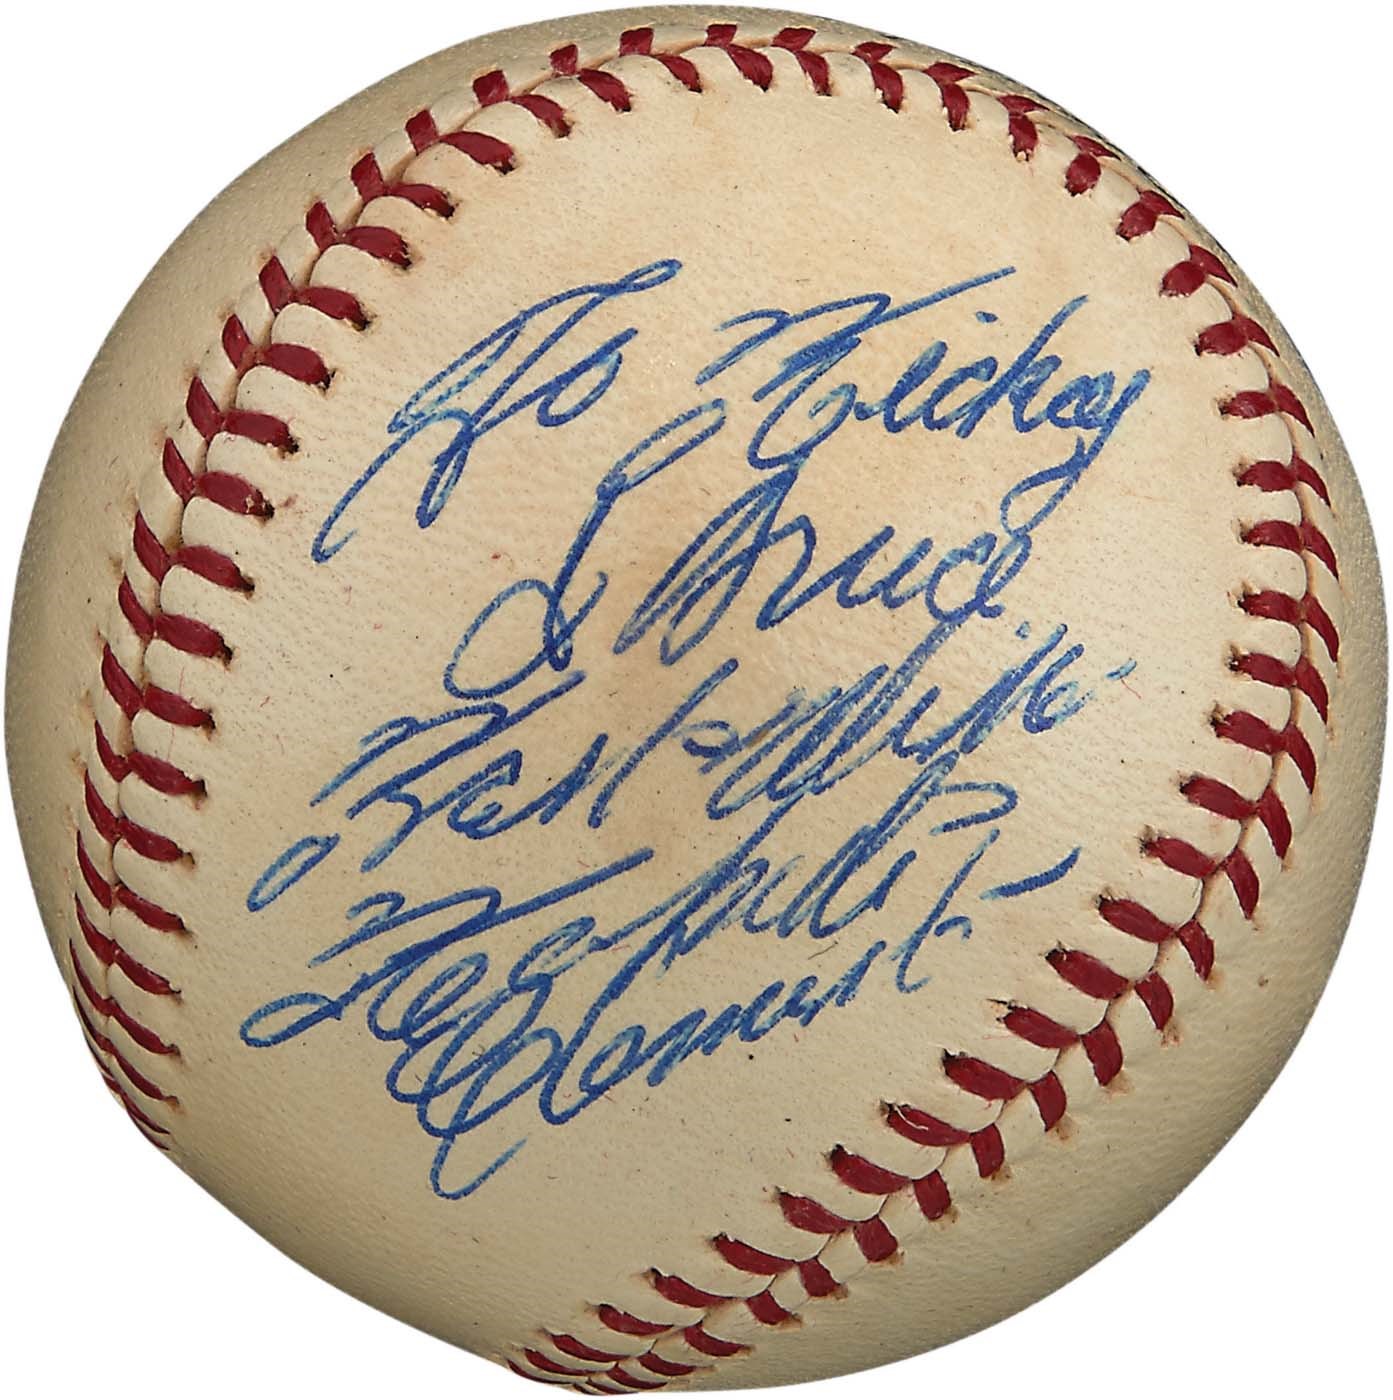 Clemente and Pittsburgh Pirates - 1960s Roberto Clemente Single-Signed Baseball with Perfect "10" Autograph (Overall PSA Mint 9)